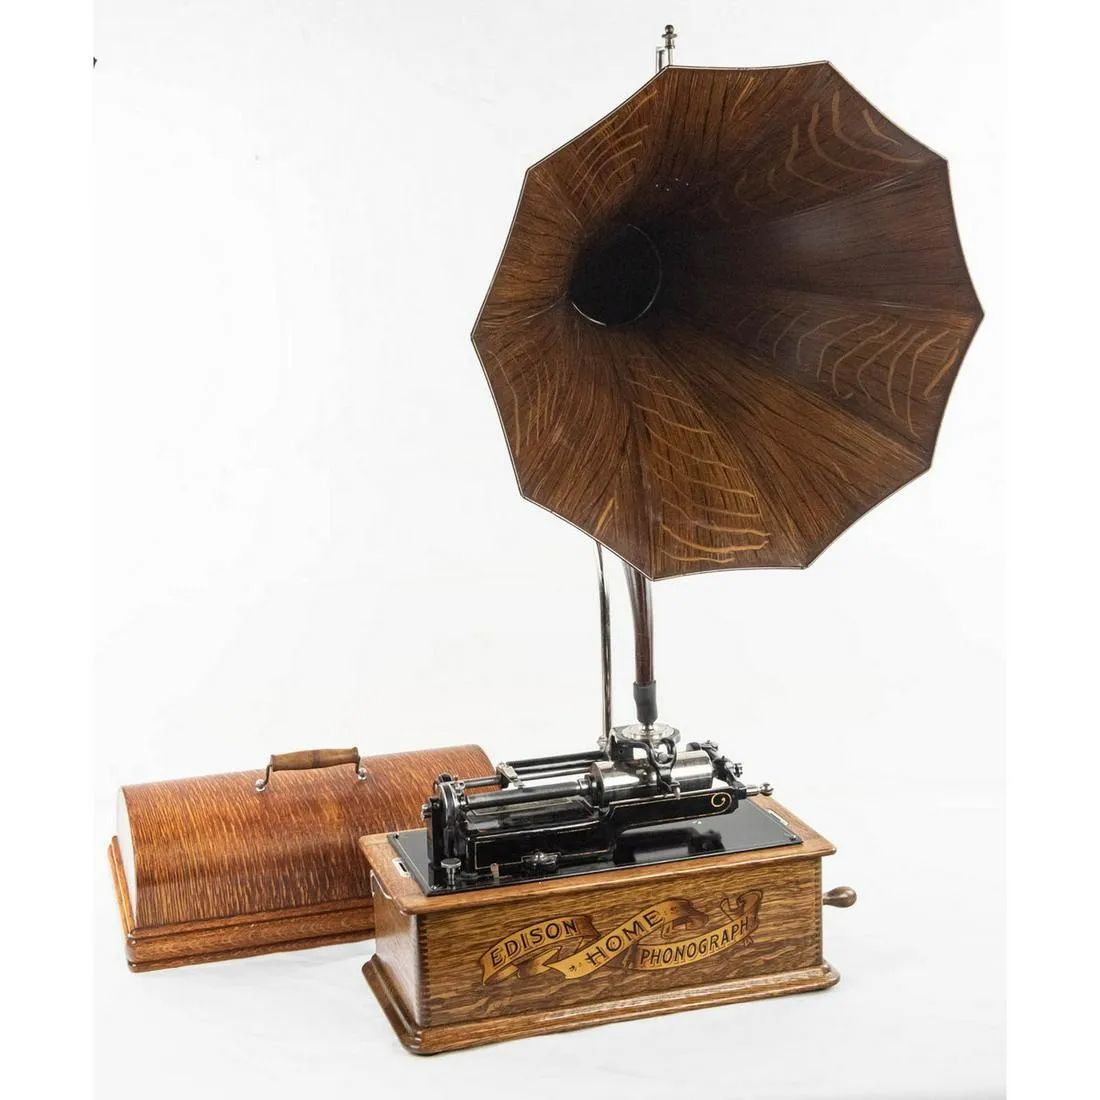 Edison Home Model A Phonograph with Cygnet Horn Fonografo Edison Home Model A co&hellip;